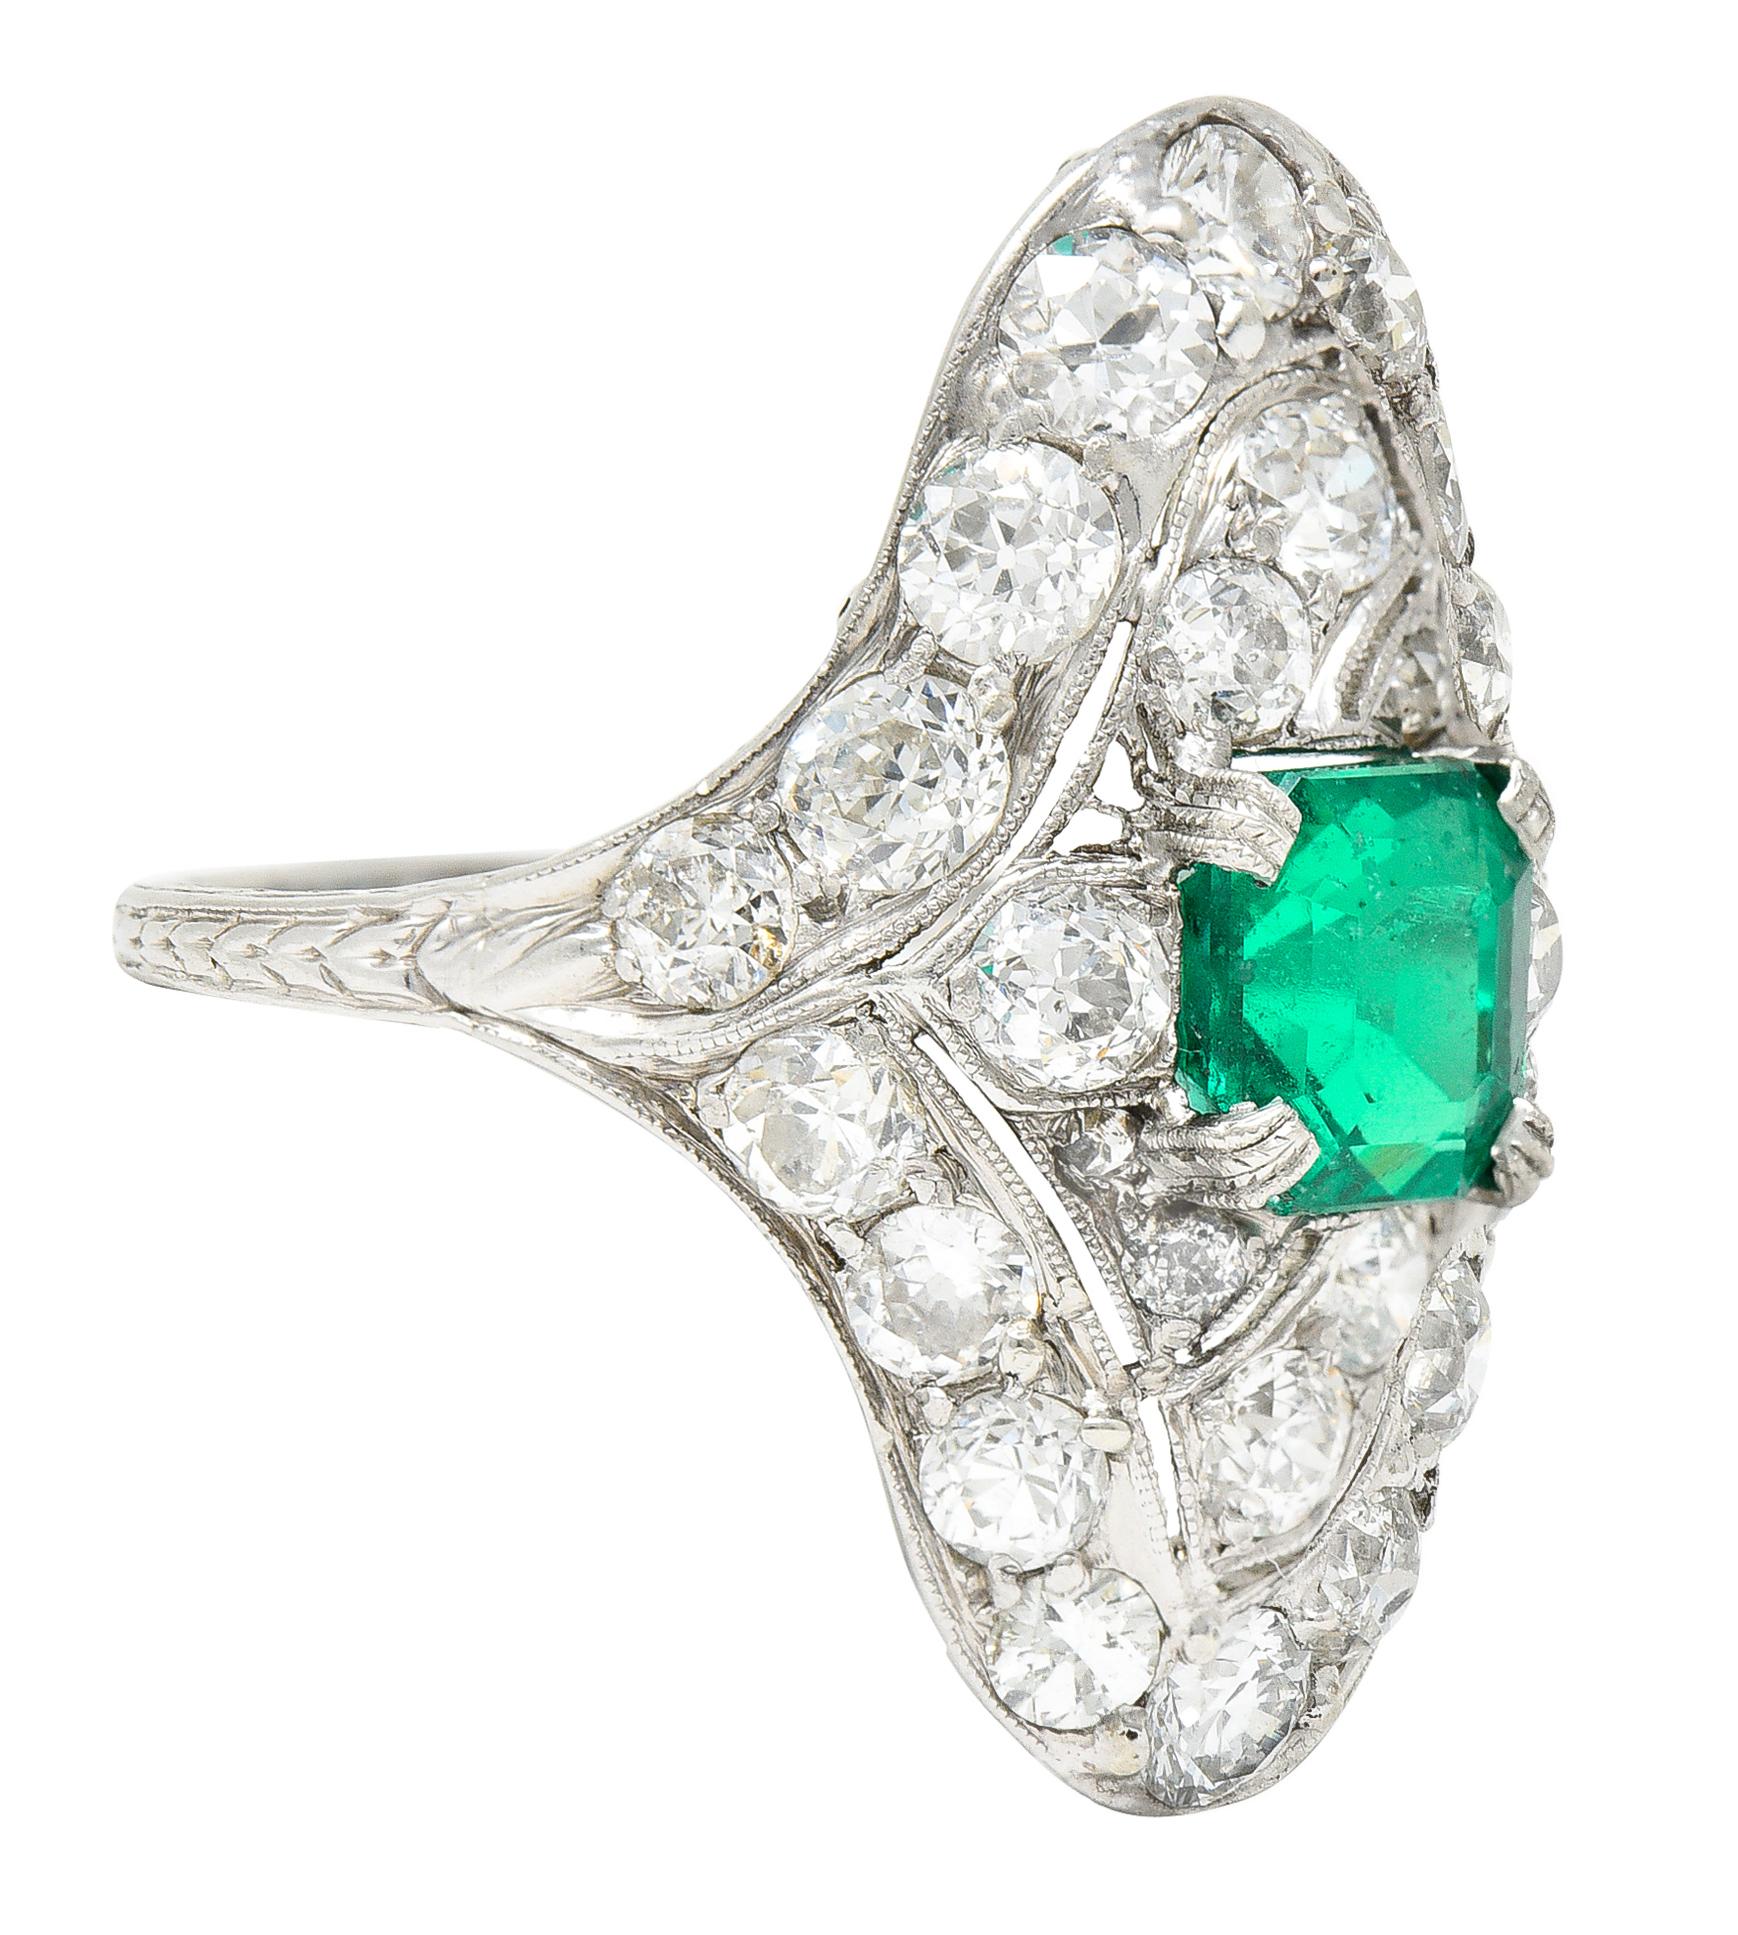 Centering an emerald cut emerald weighing approximately 1.53 carats total. Transparent well saturated bright green in color with natural inclusions - surface reaching. Set with milgrain detail prongs in a pierced wavy navette shaped surround. Bead